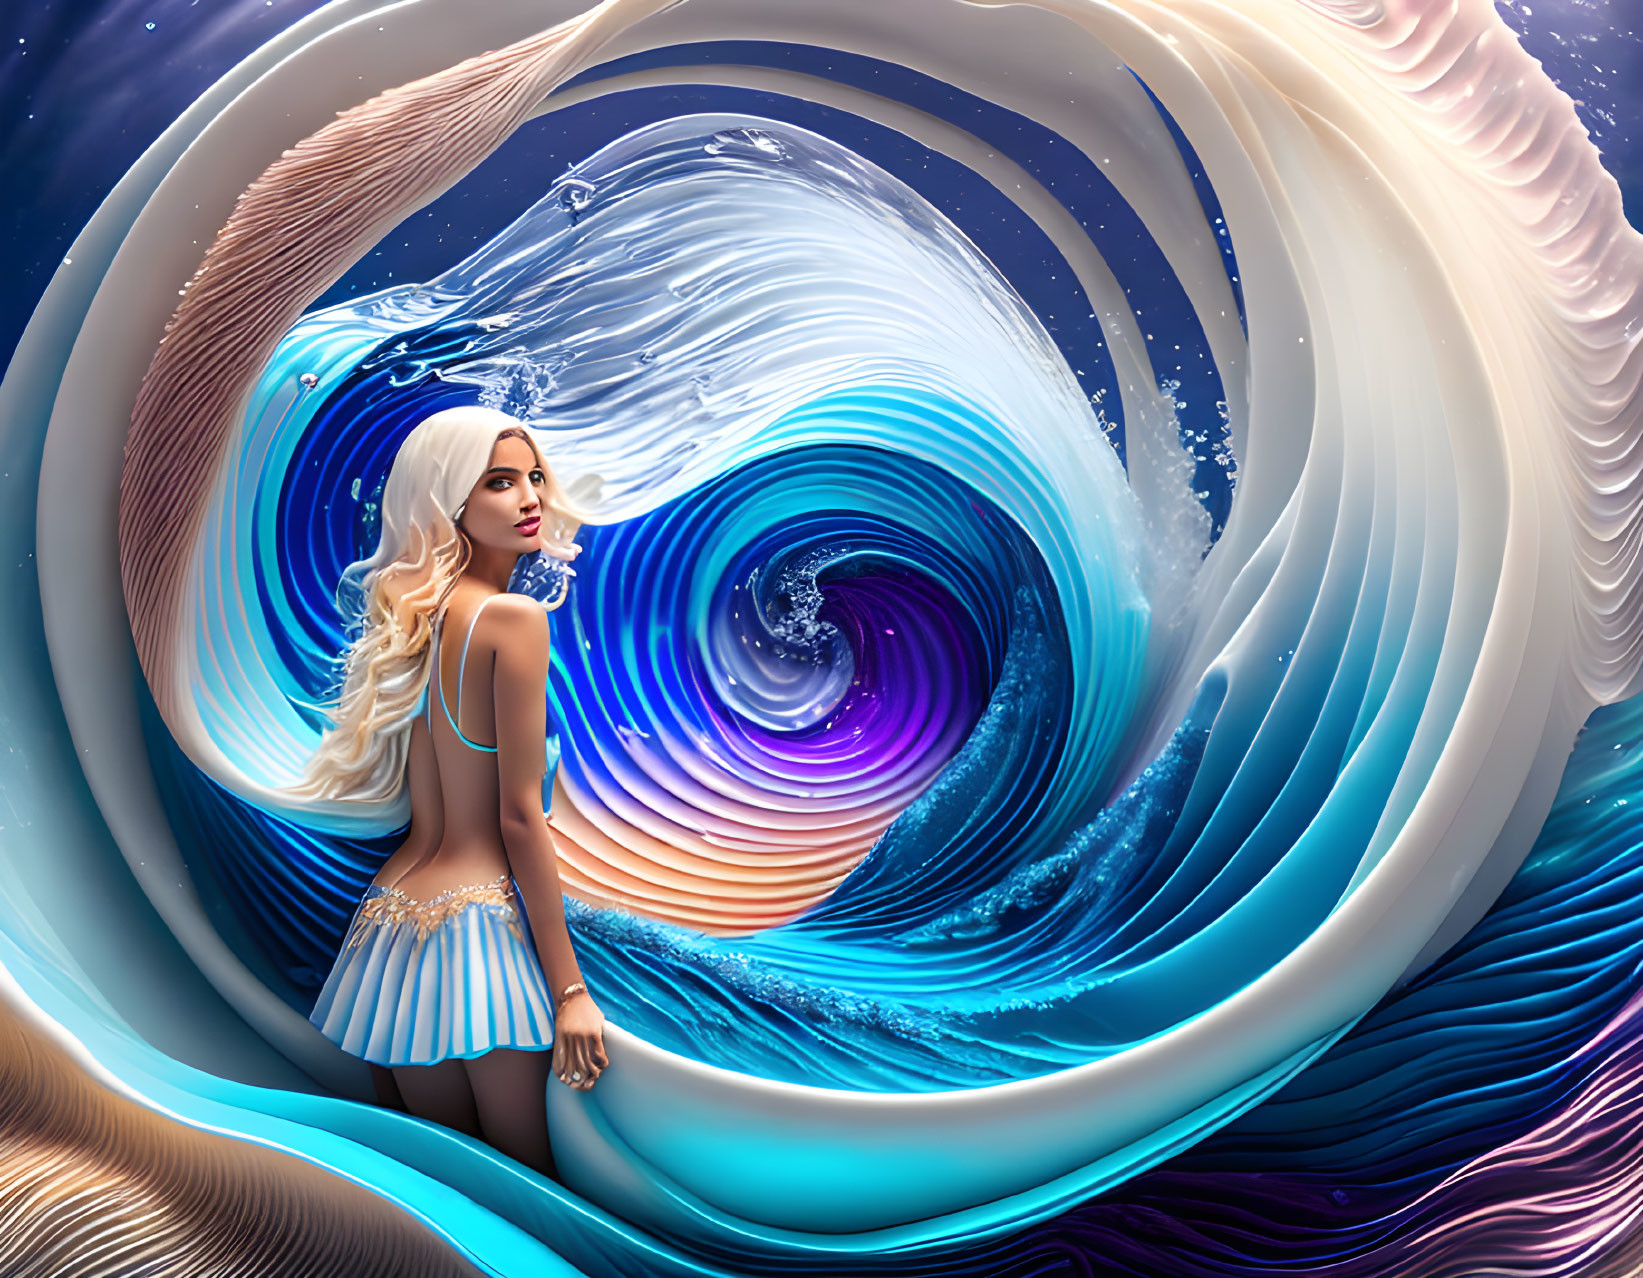 Silver-haired woman in aquatic-themed dress merging with surreal waves